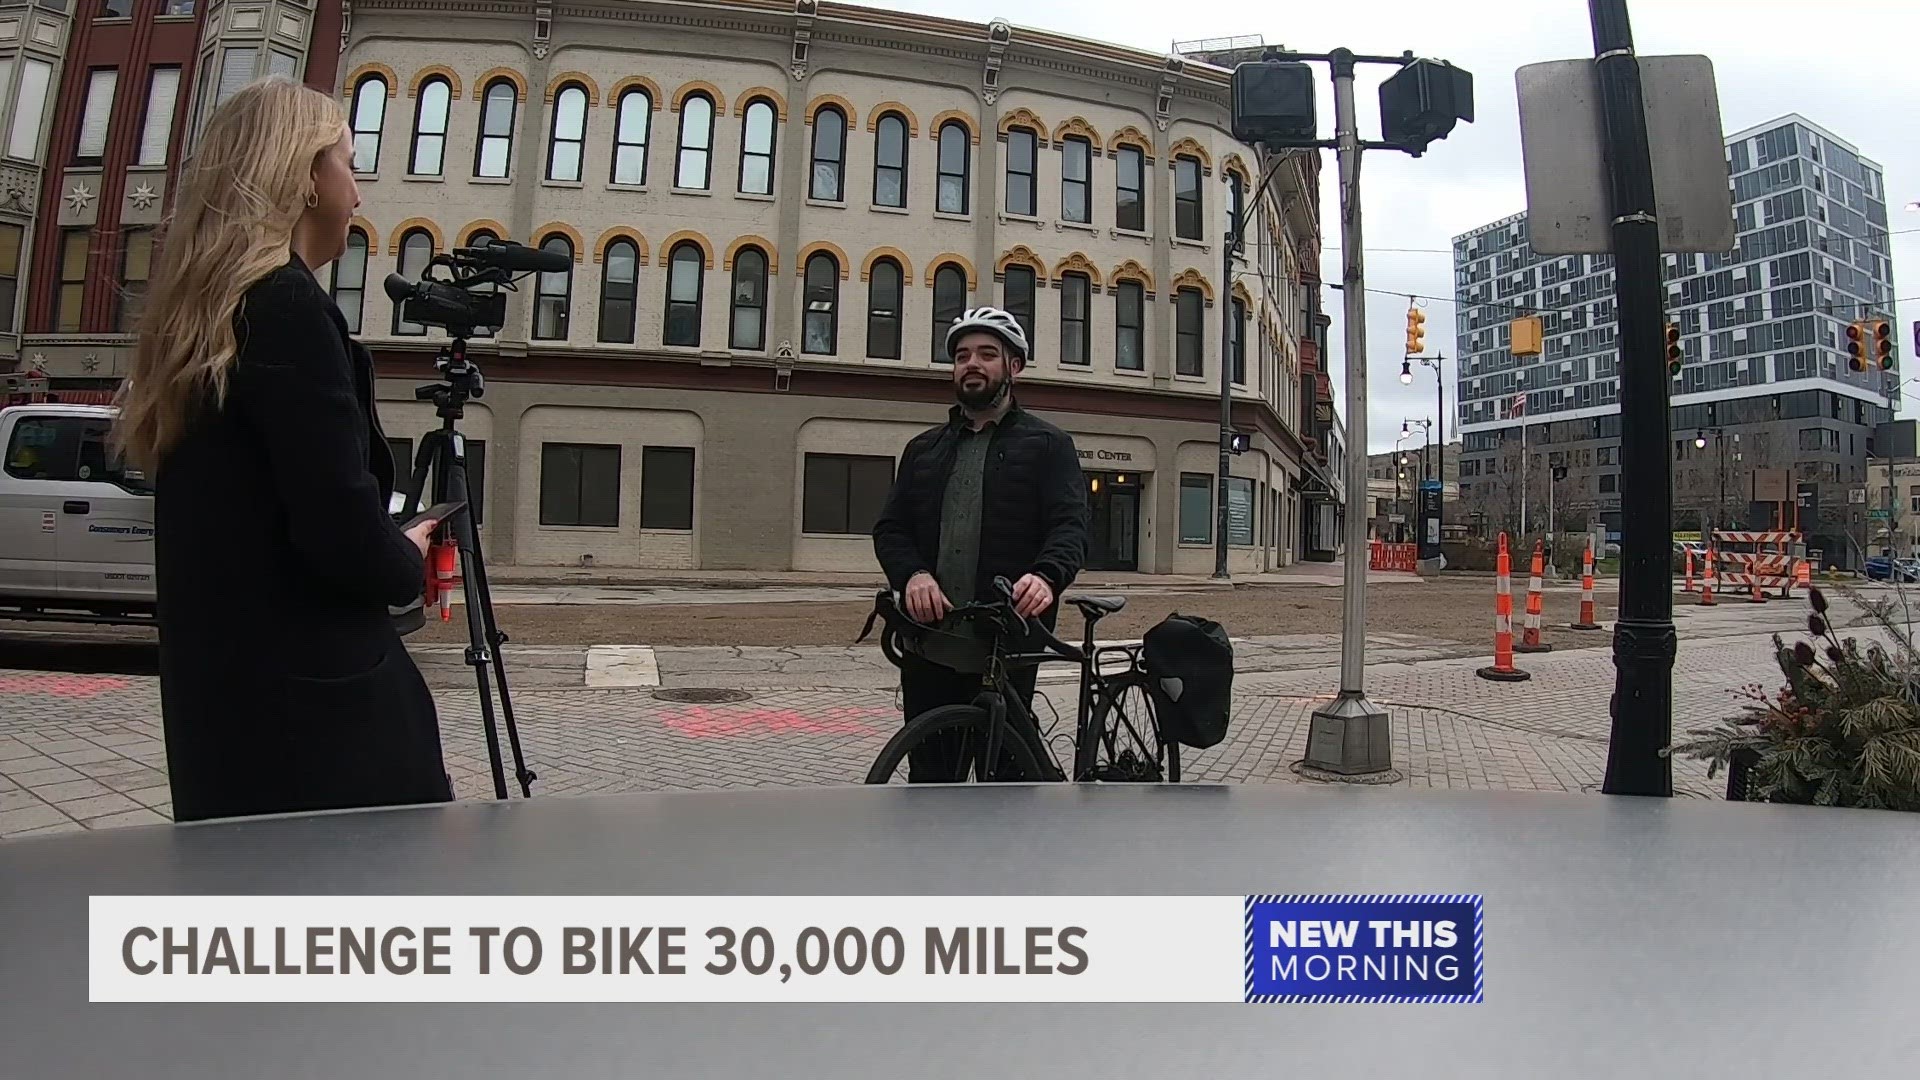 The Greater Grand Rapids Bicycle Coalition organizes the event, in which local bicyclists are tasked with collectively biking 30,000 miles.